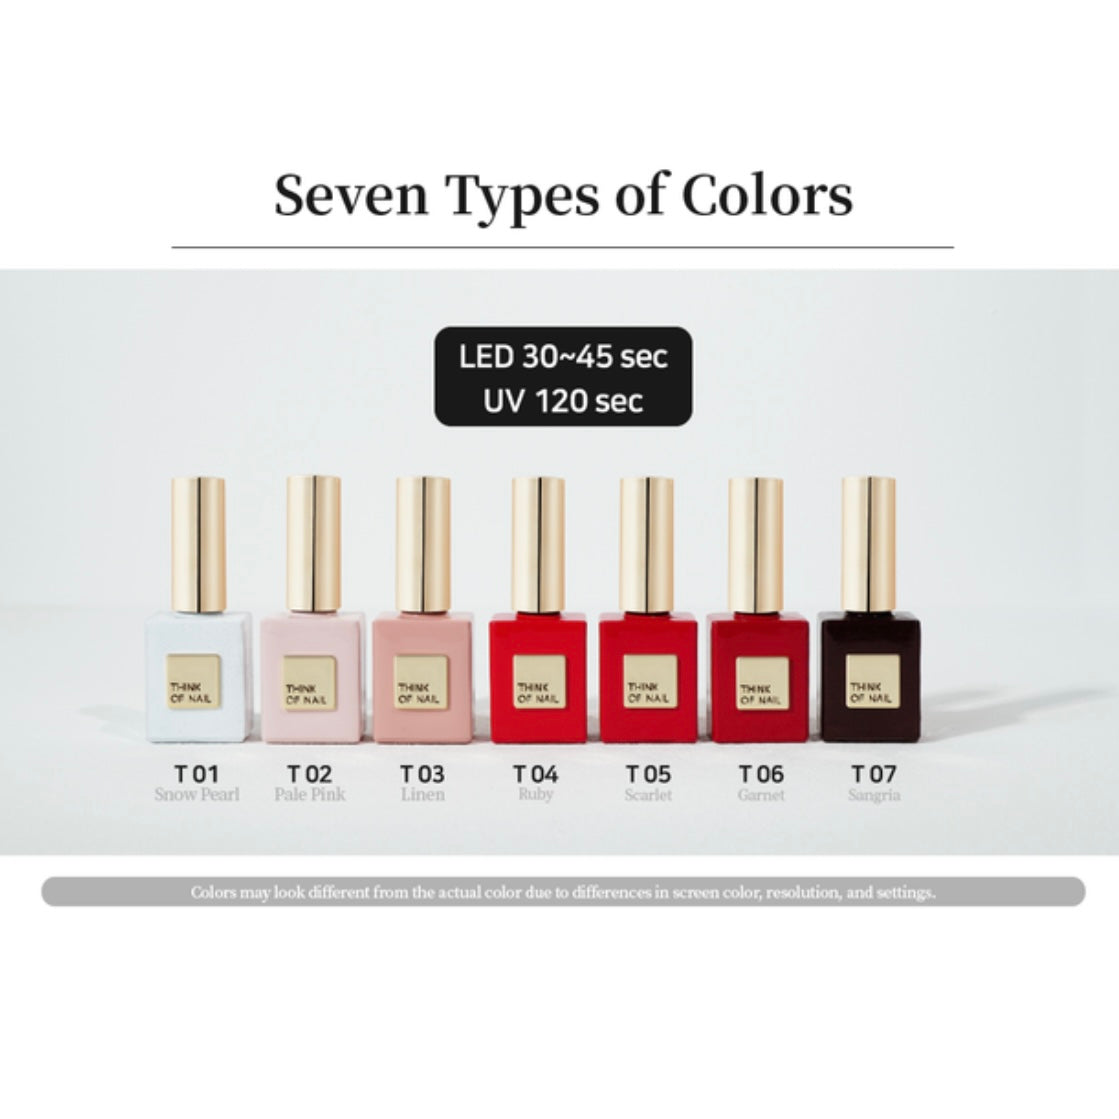 THINK OF NAIL T06 Gel Color  - LIFETIME COLLECTION (8ml)